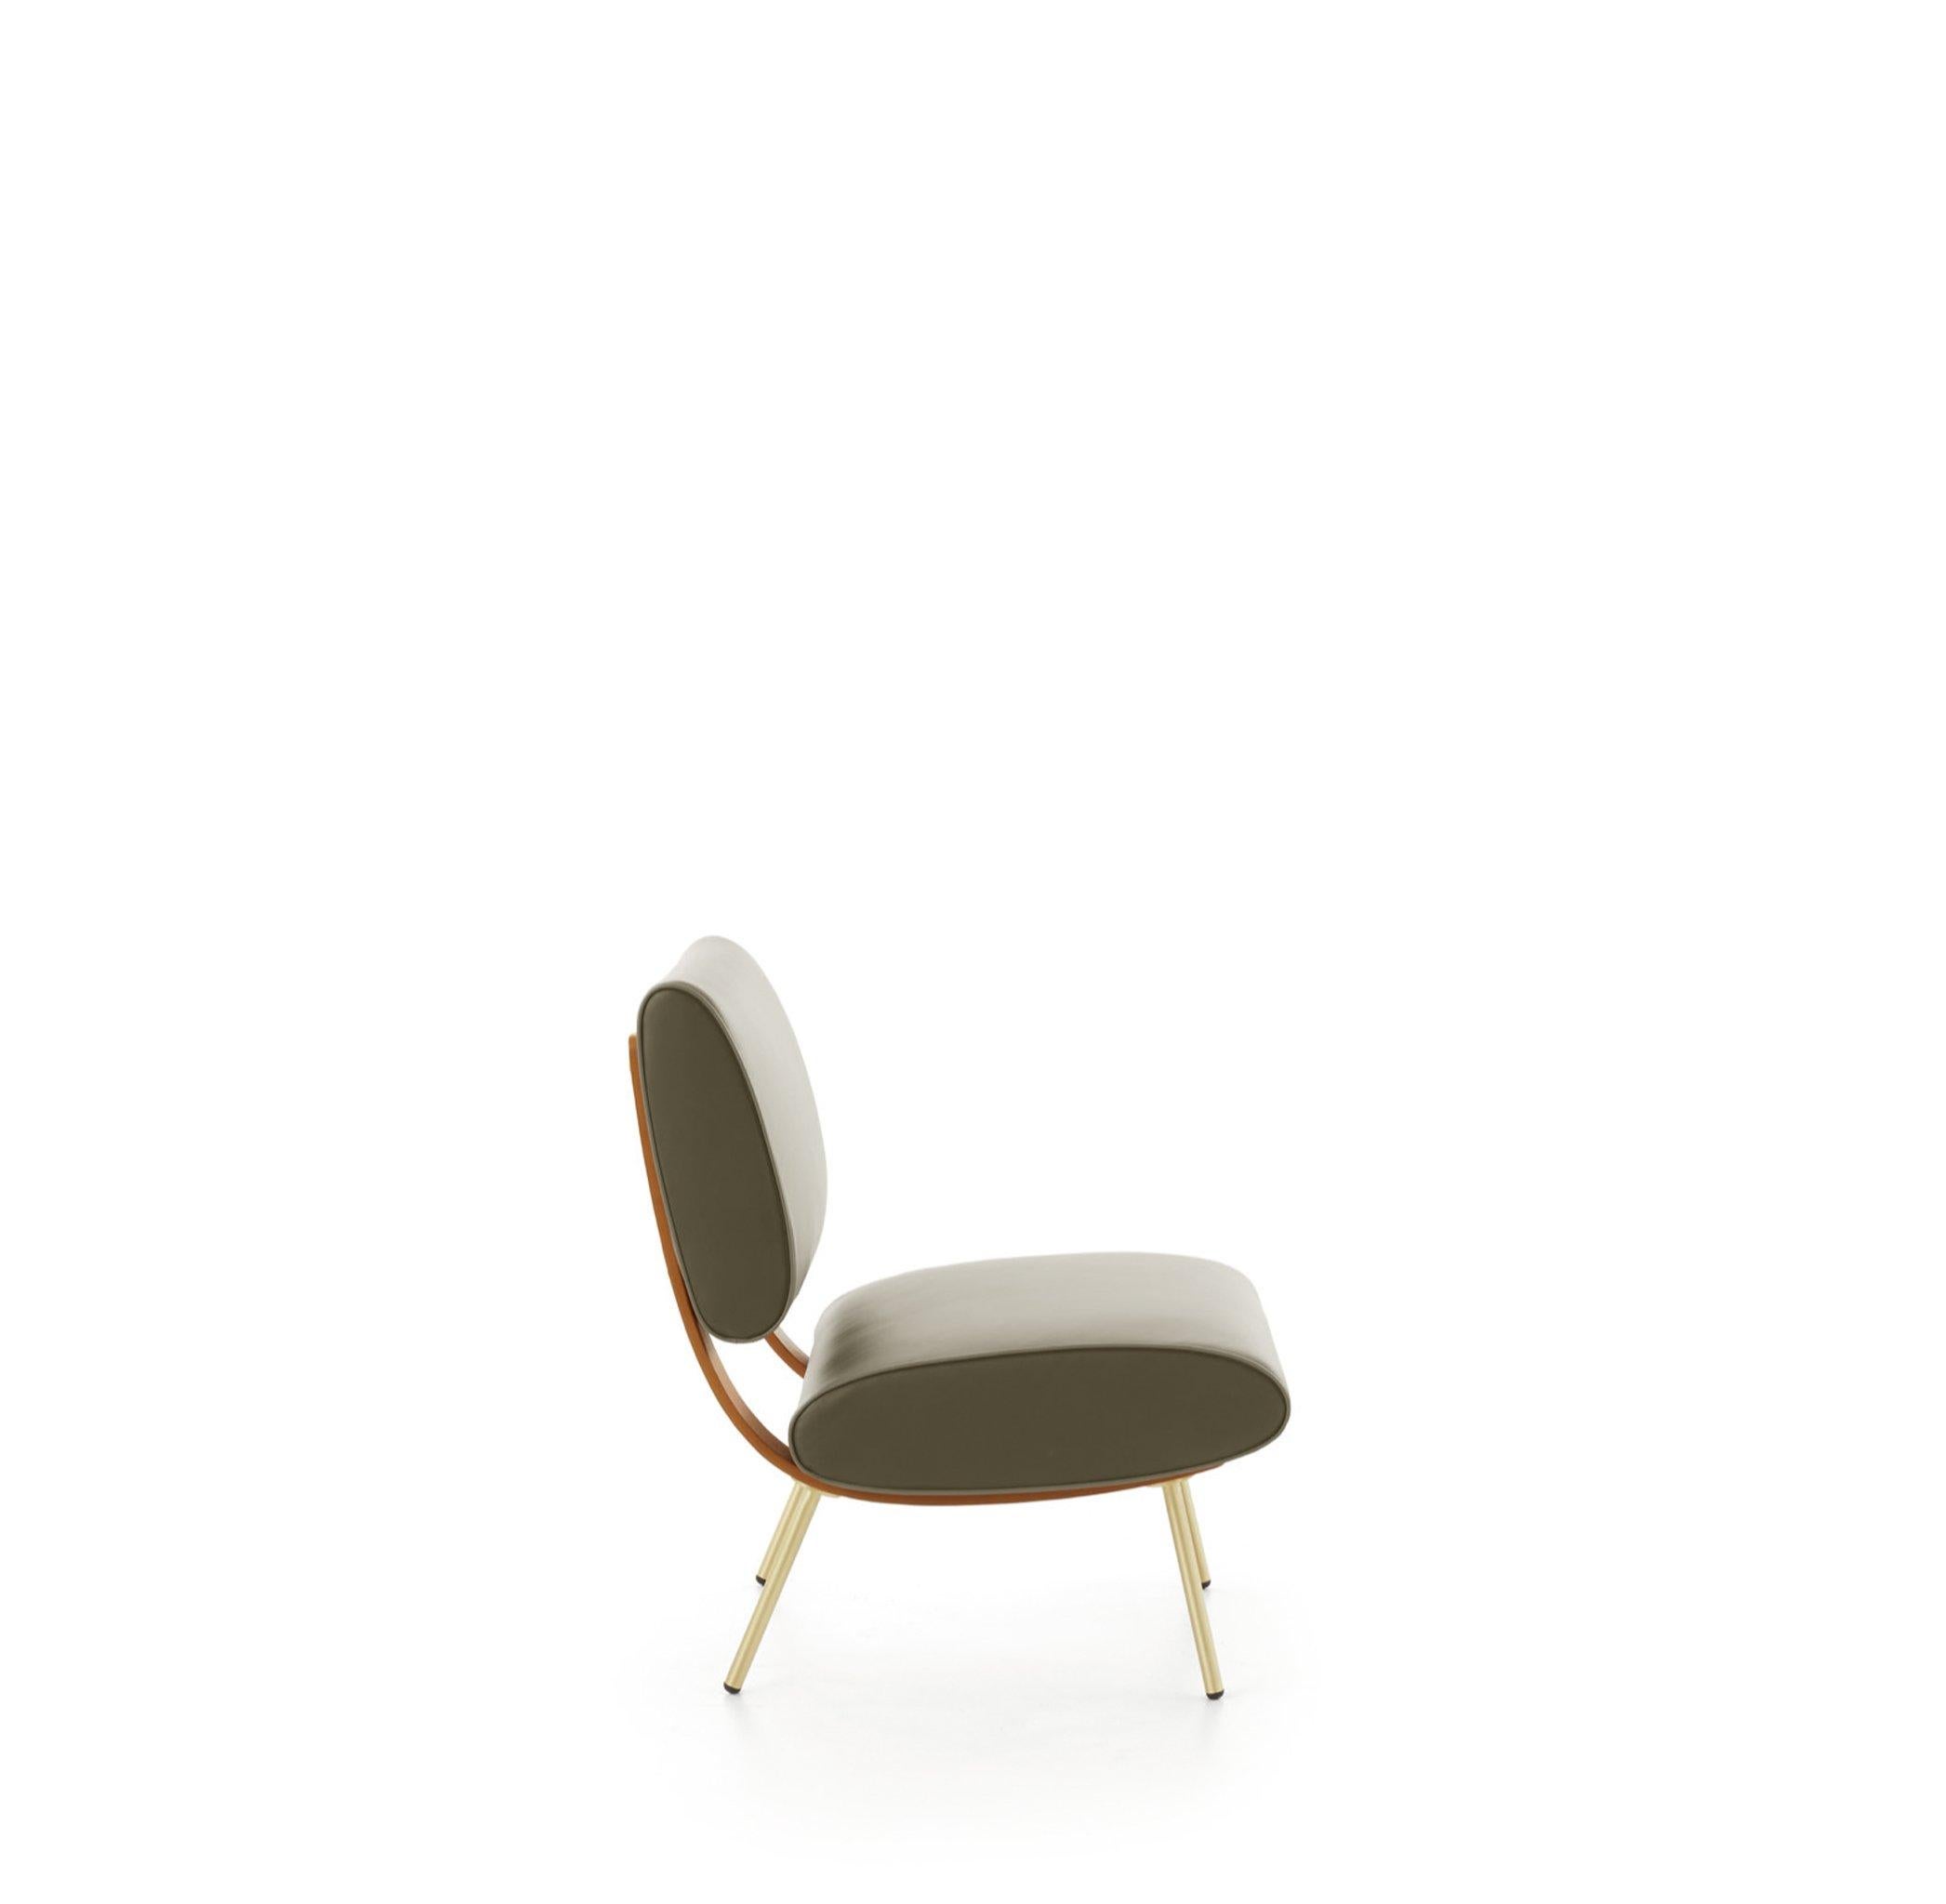 Armchair in Premium Leather Molteni&C by Gio Ponti Round D.154.5 - made in Italy
More than 60 years after the original idea, Round (D.154.5) was reborn thanks to the Heritage Collection reissue project by Molteni&C, in collaboration with the Gio